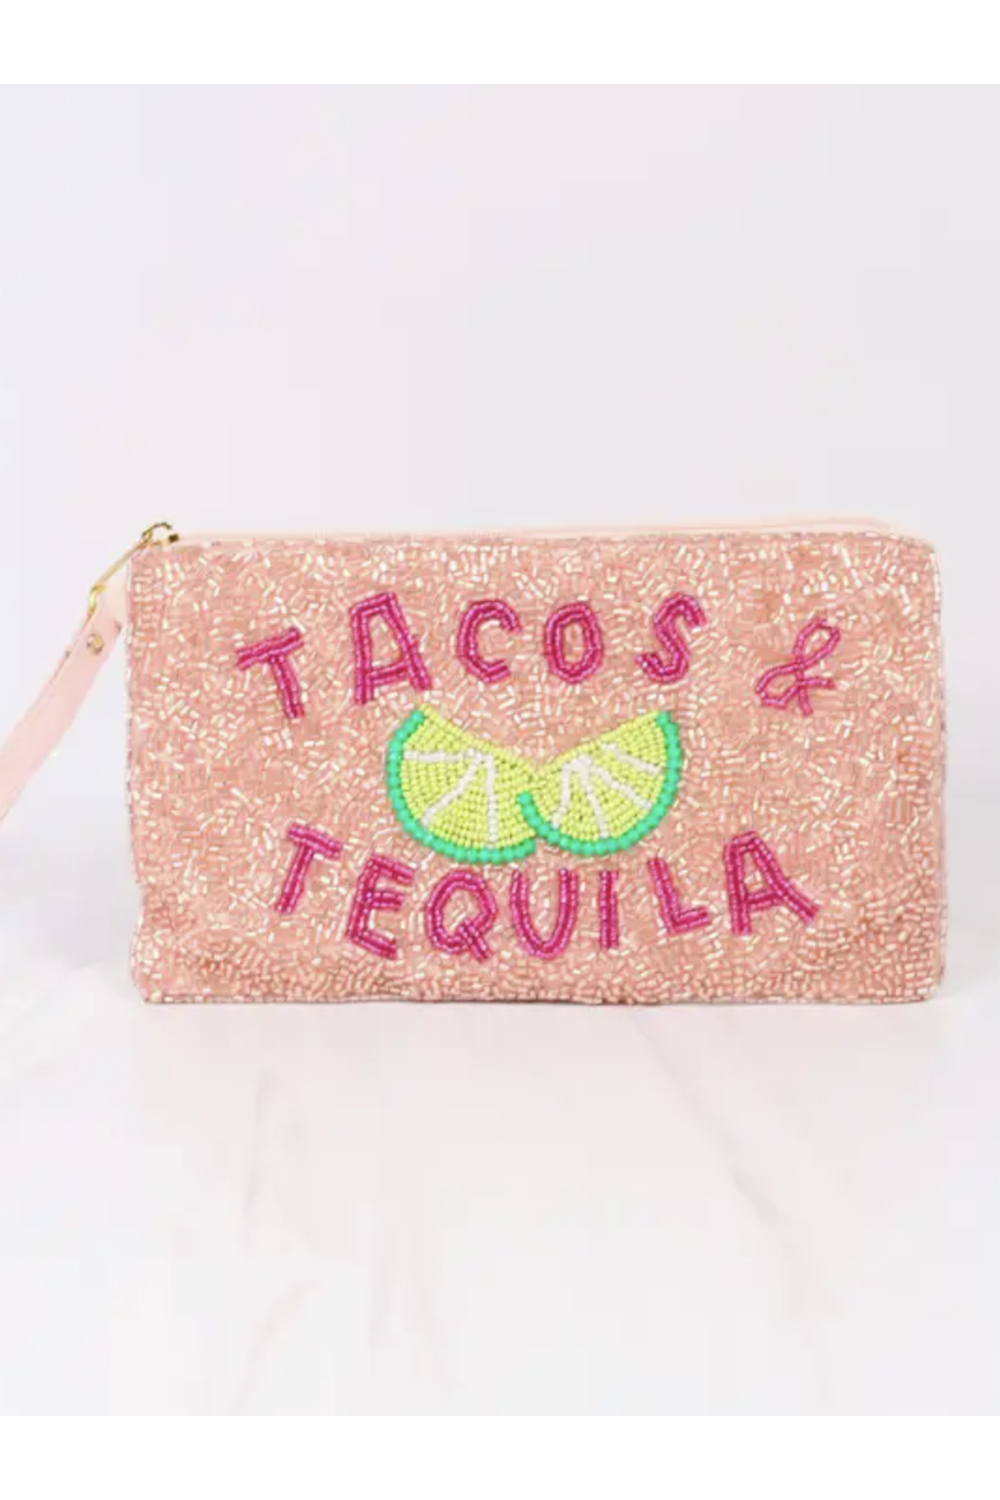 Tacos & Tequila Beaded Pouch